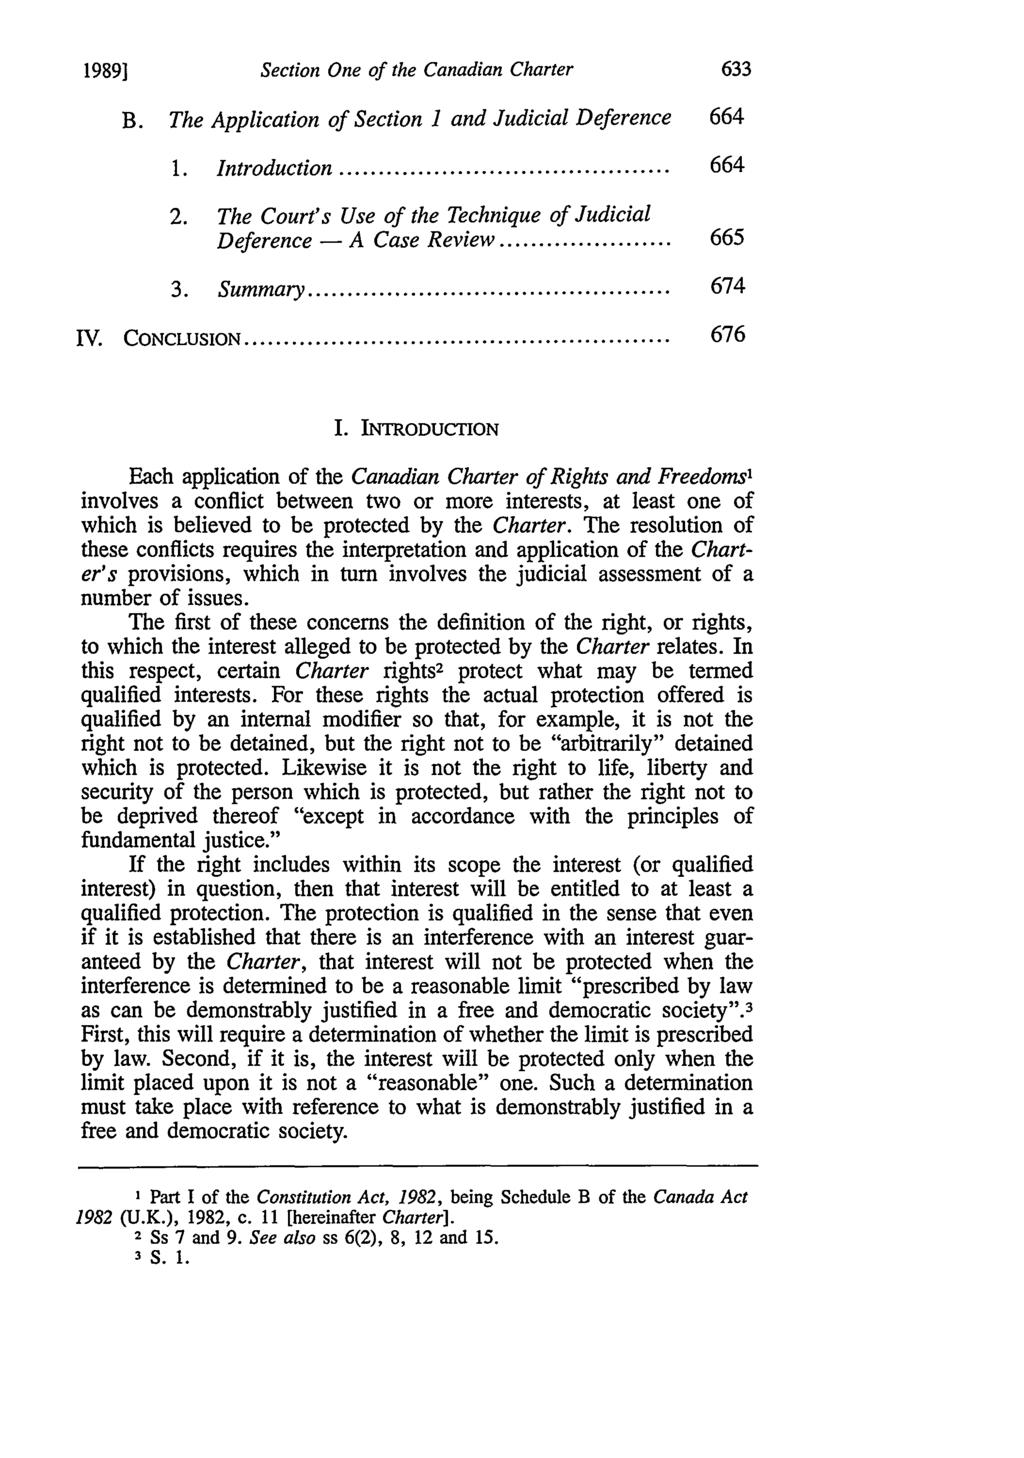 1989] Section One of the Canadian Charter B. The Application of Section 1 and Judicial Deference 664 1. Introduction... 664 2. The Court's Use of the Technique of Judicial Deference - A Case Review.